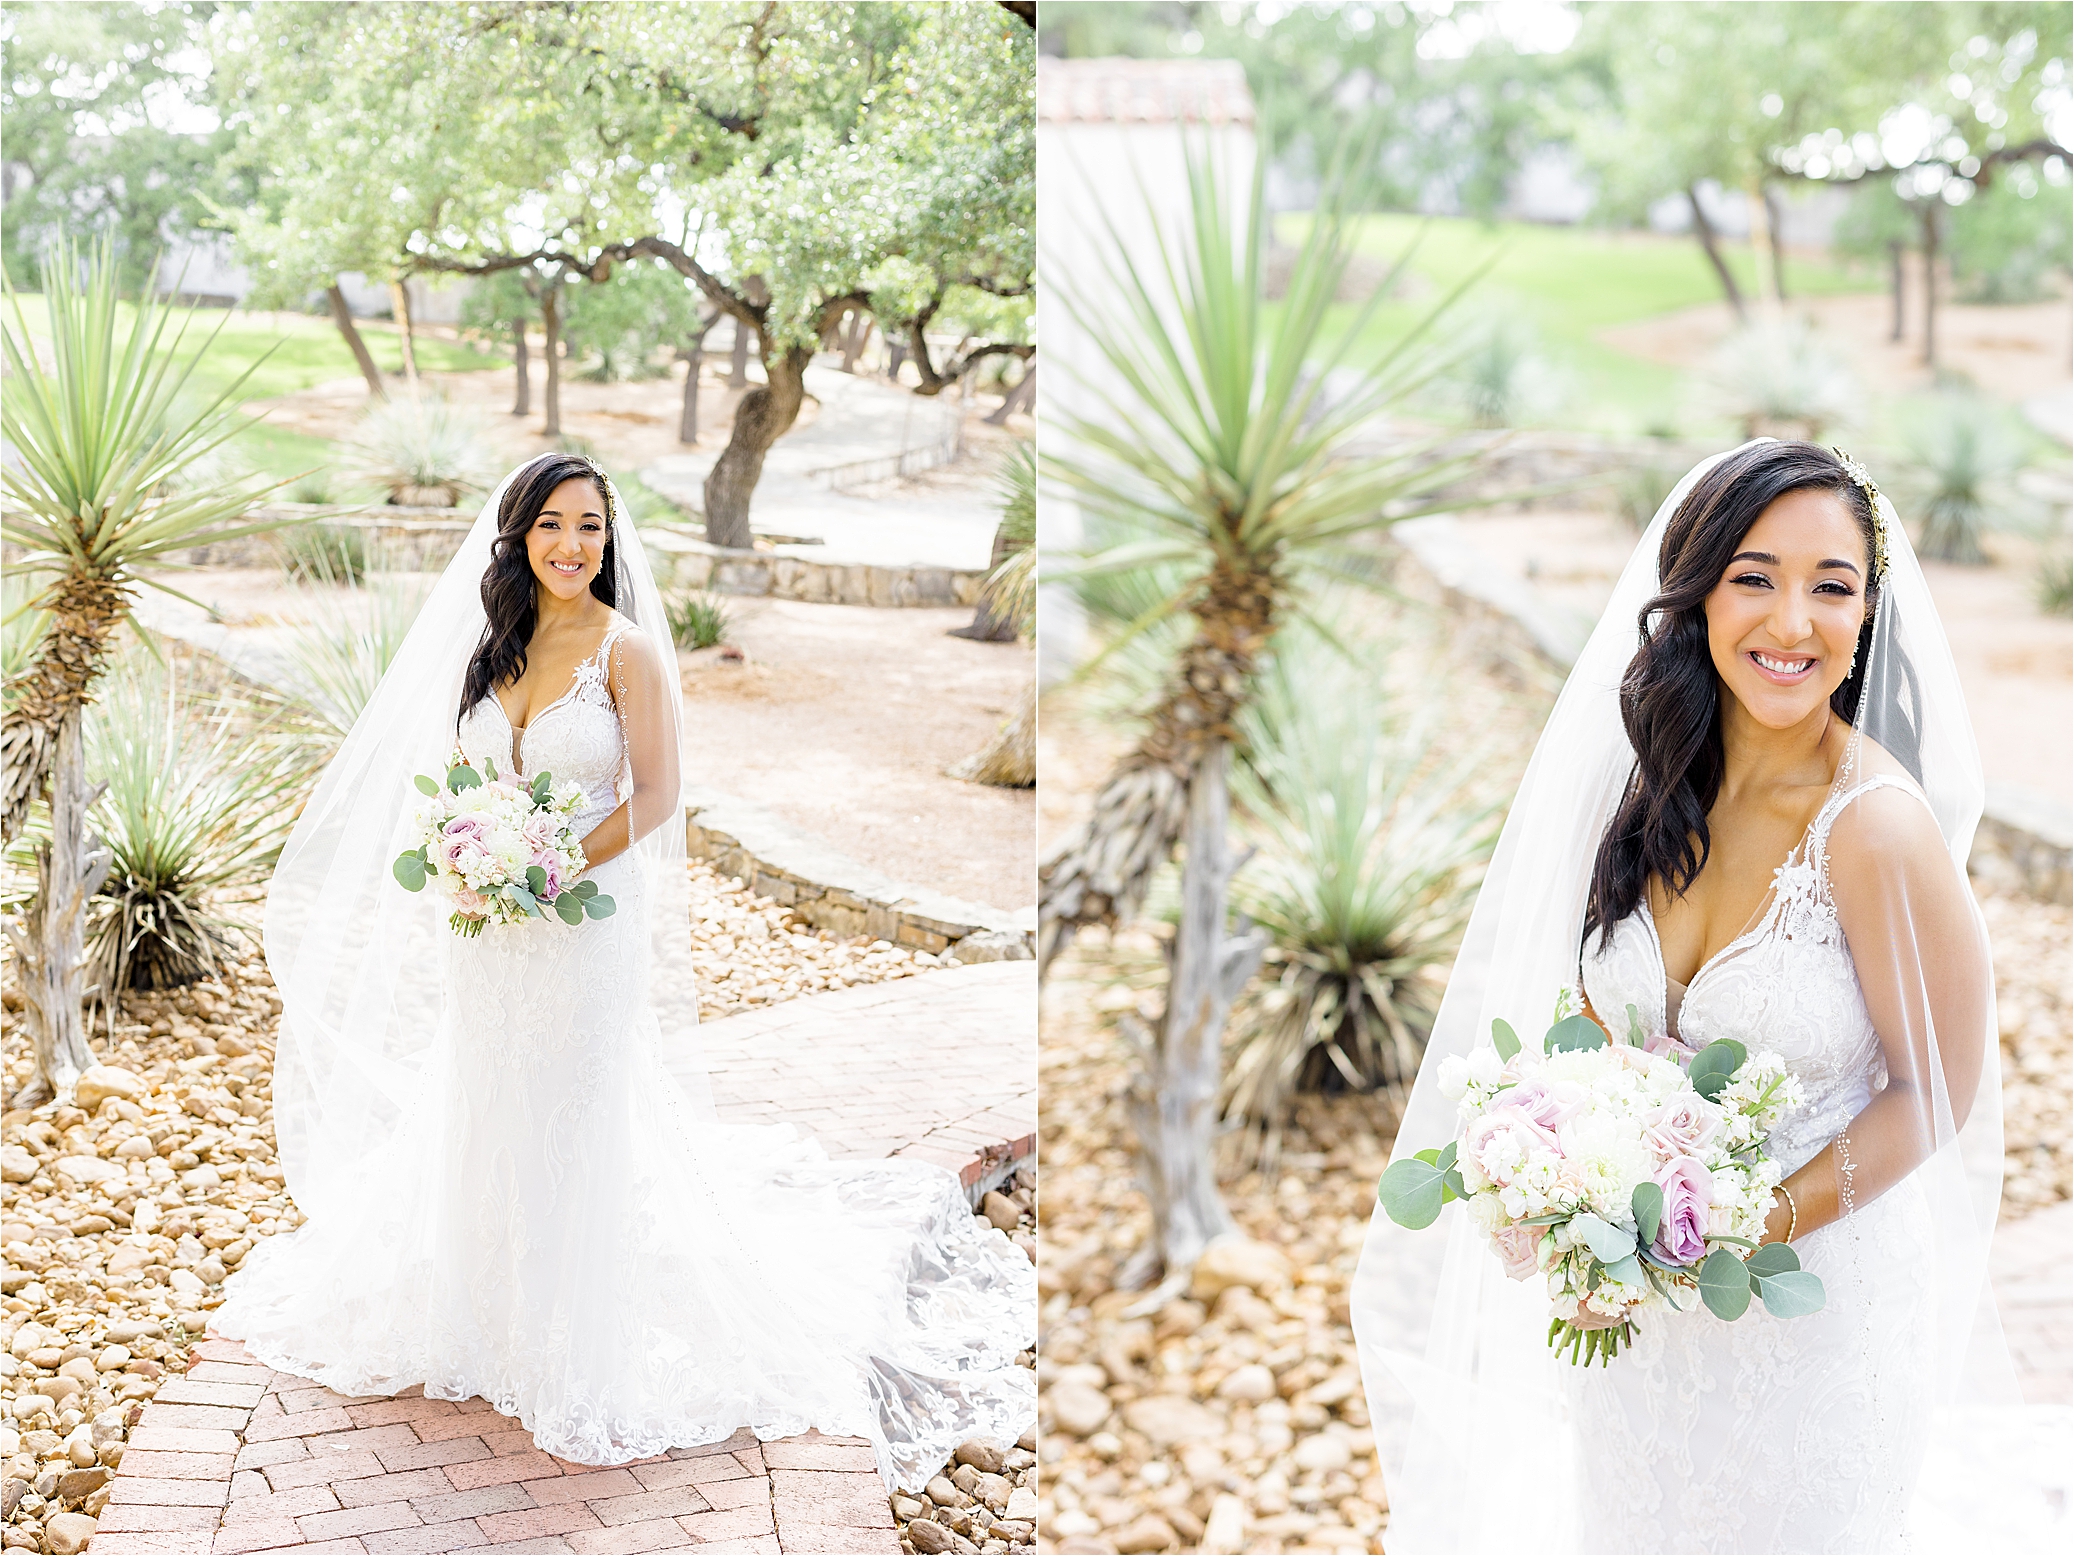 A bride in her wedding dress smiles and laughs at the camera outside surround by trees and holding a bouquet of white and pink flowers at Lost Mission In San Antonio, Texas